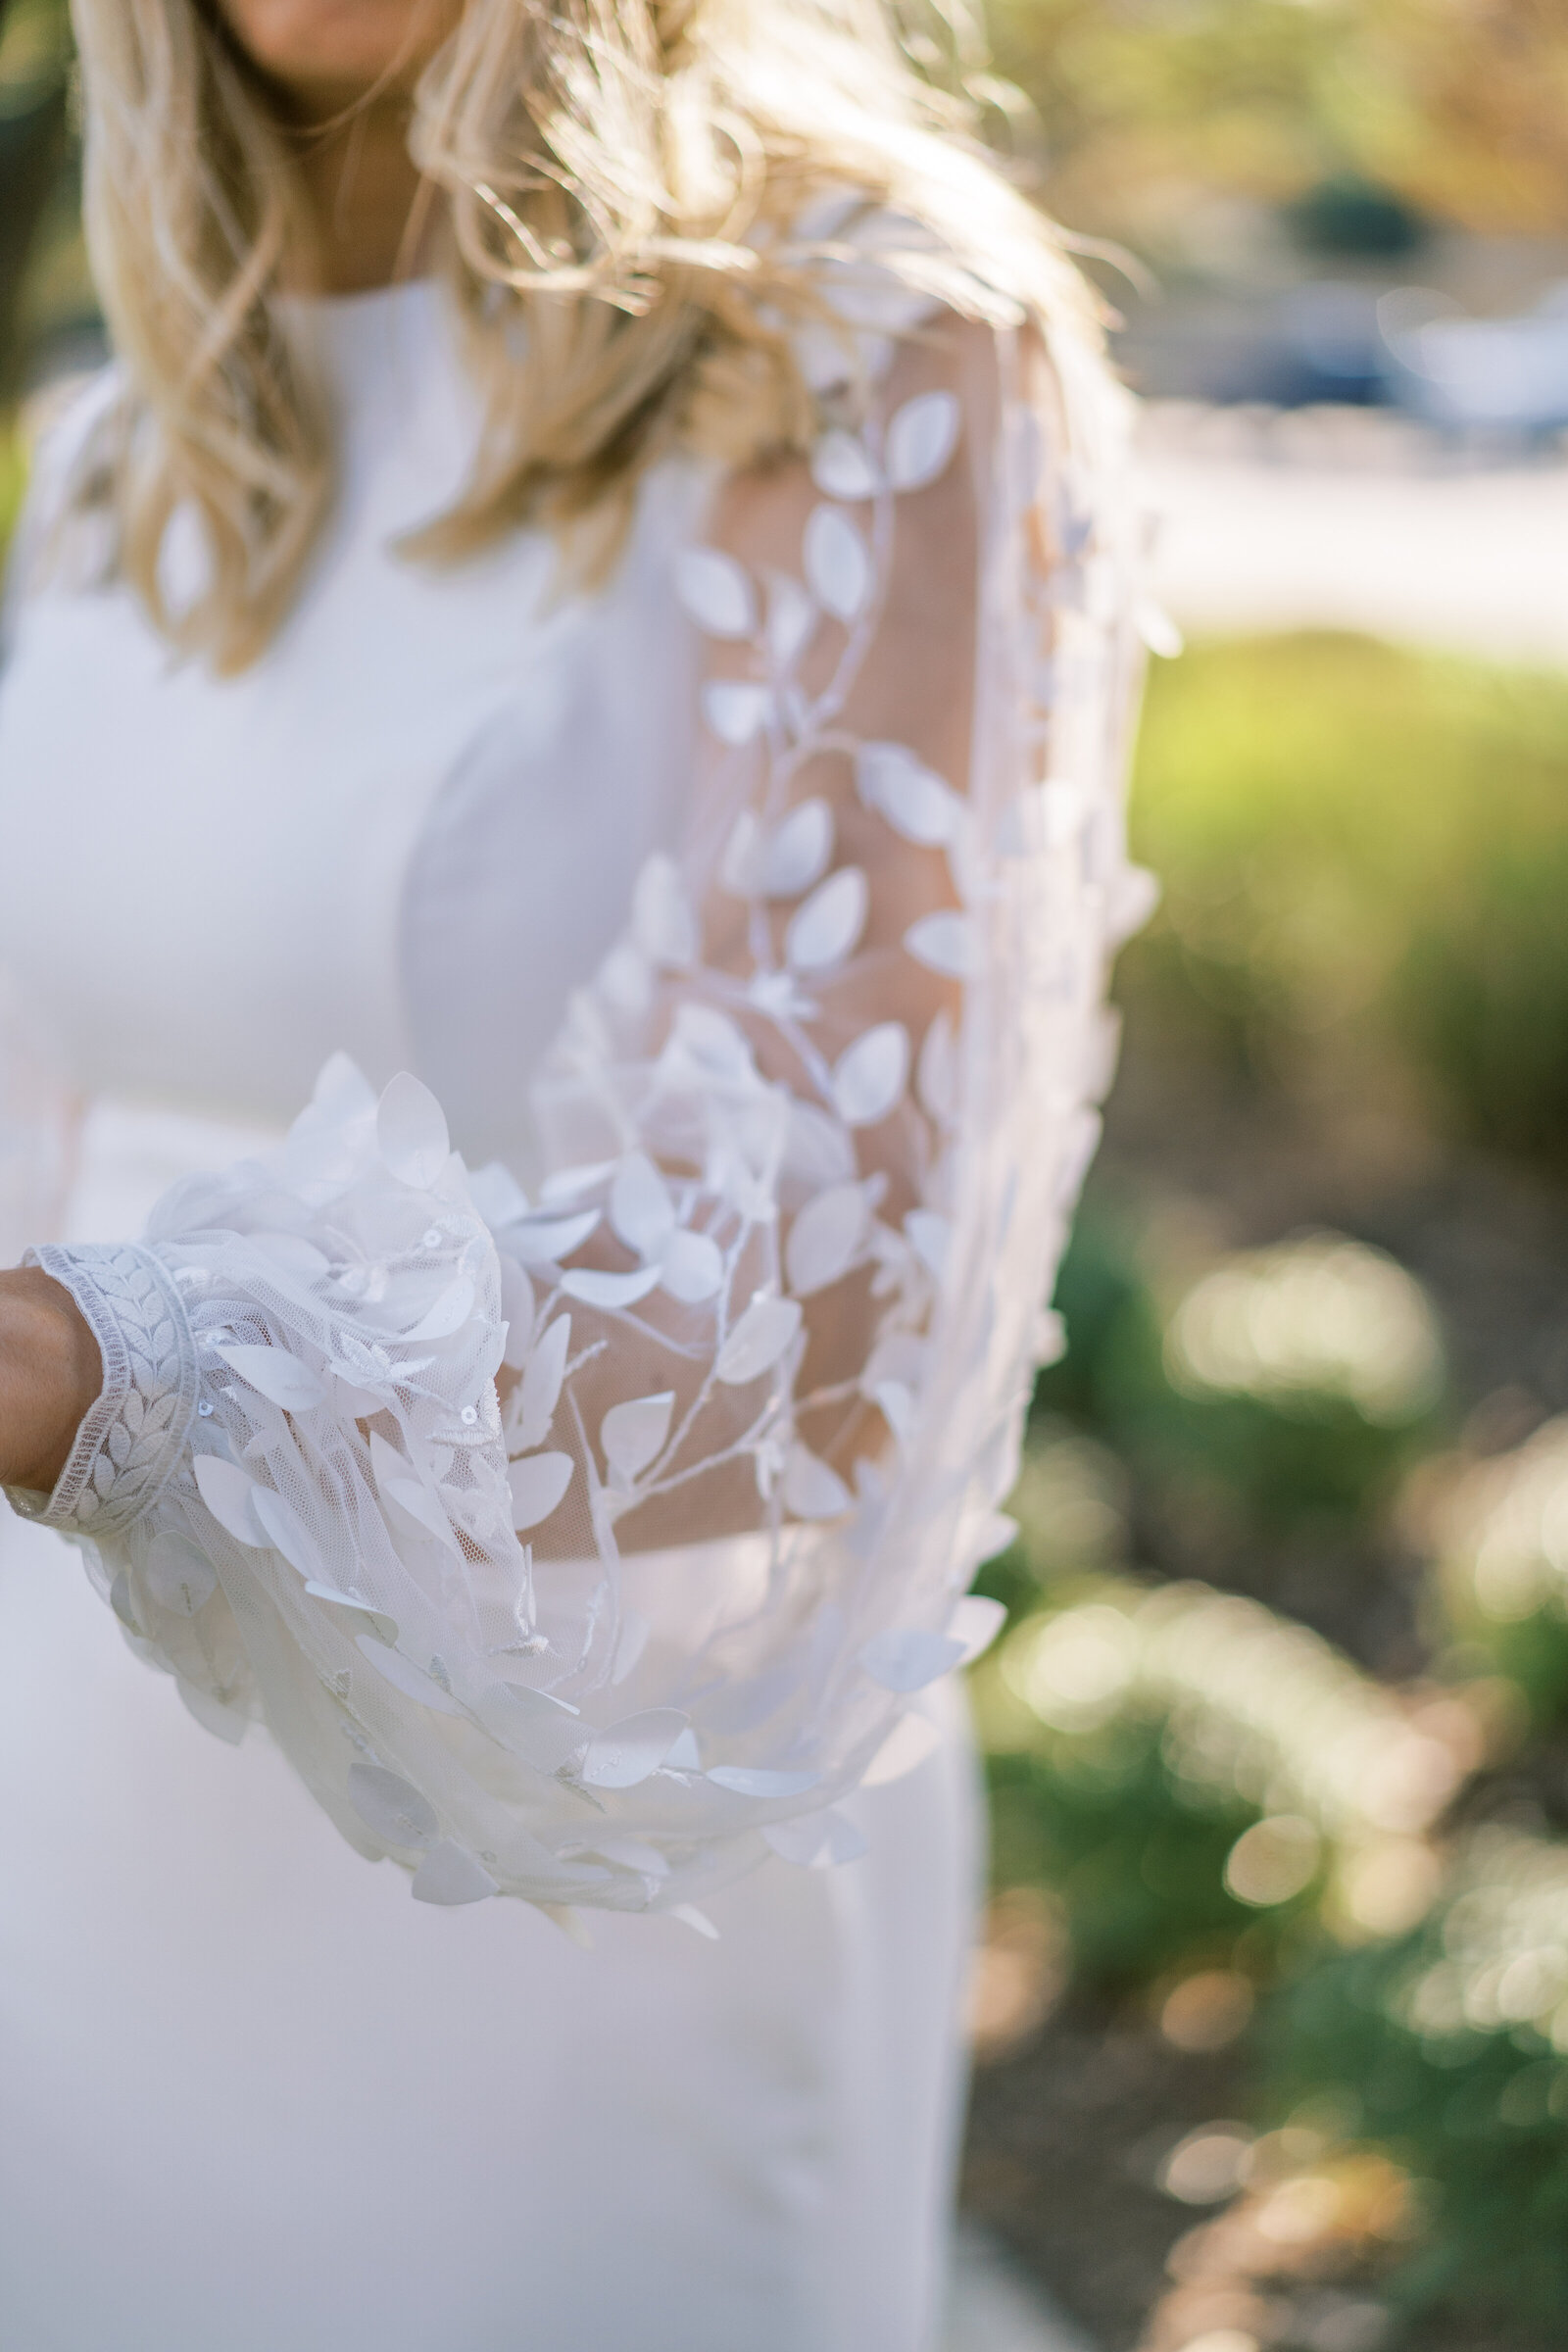 Bride in a white wedding gown with petals on the sleeves outdoors.